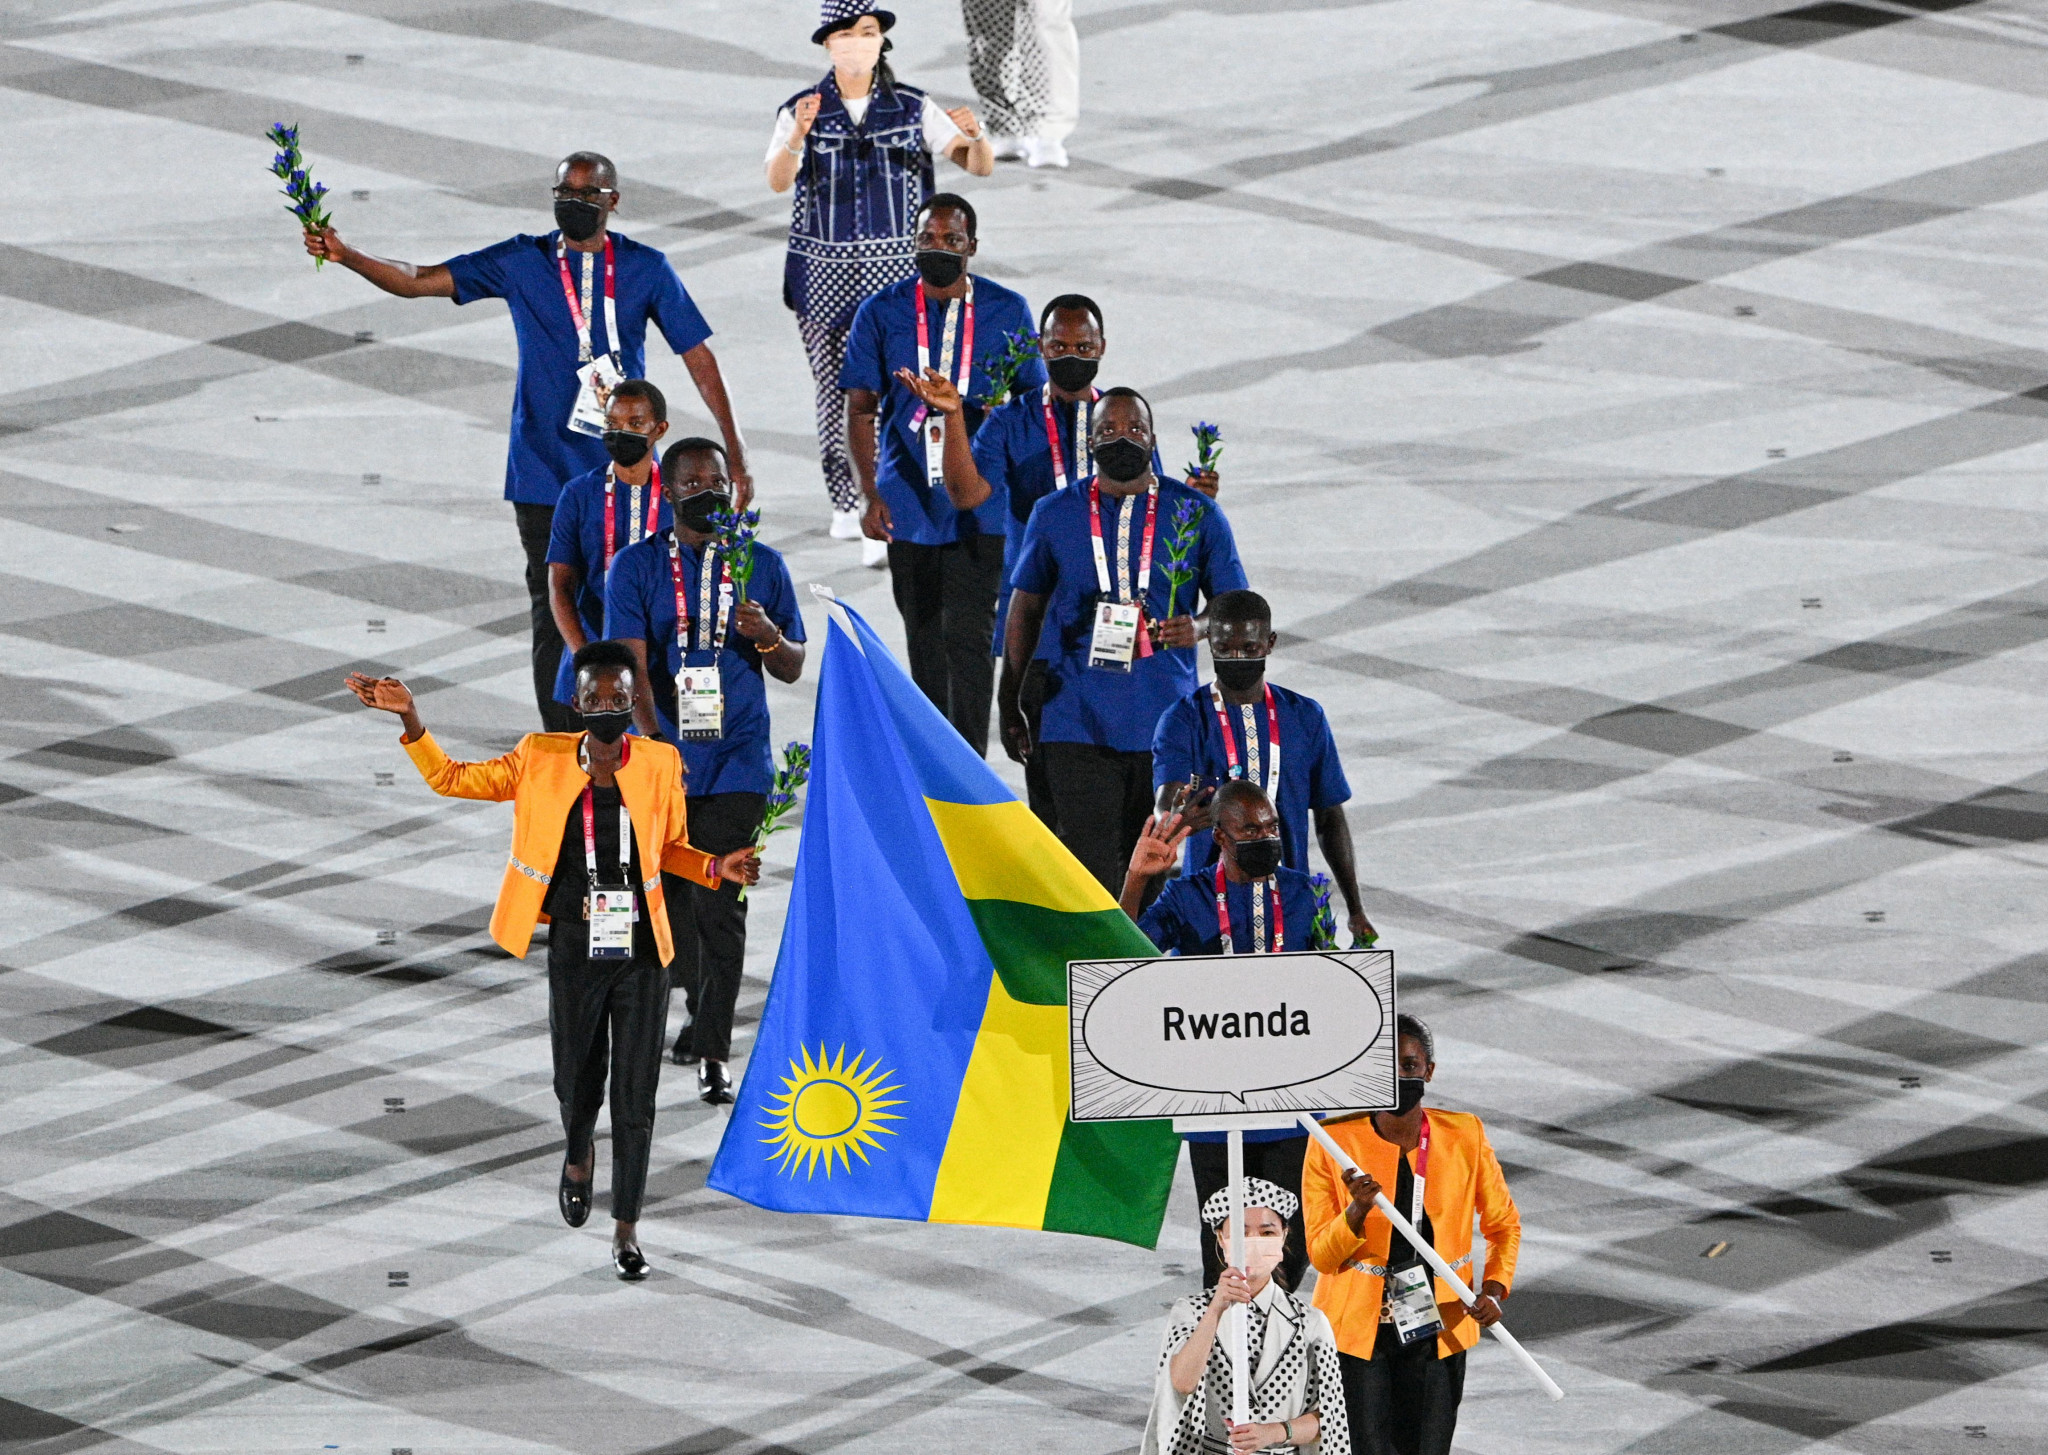 Rwanda National Olympic and Sports Committee President Theogene Uwayo has warned that more investment is needed if the country is going to end its 40-year wait for a medal ©Getty Images